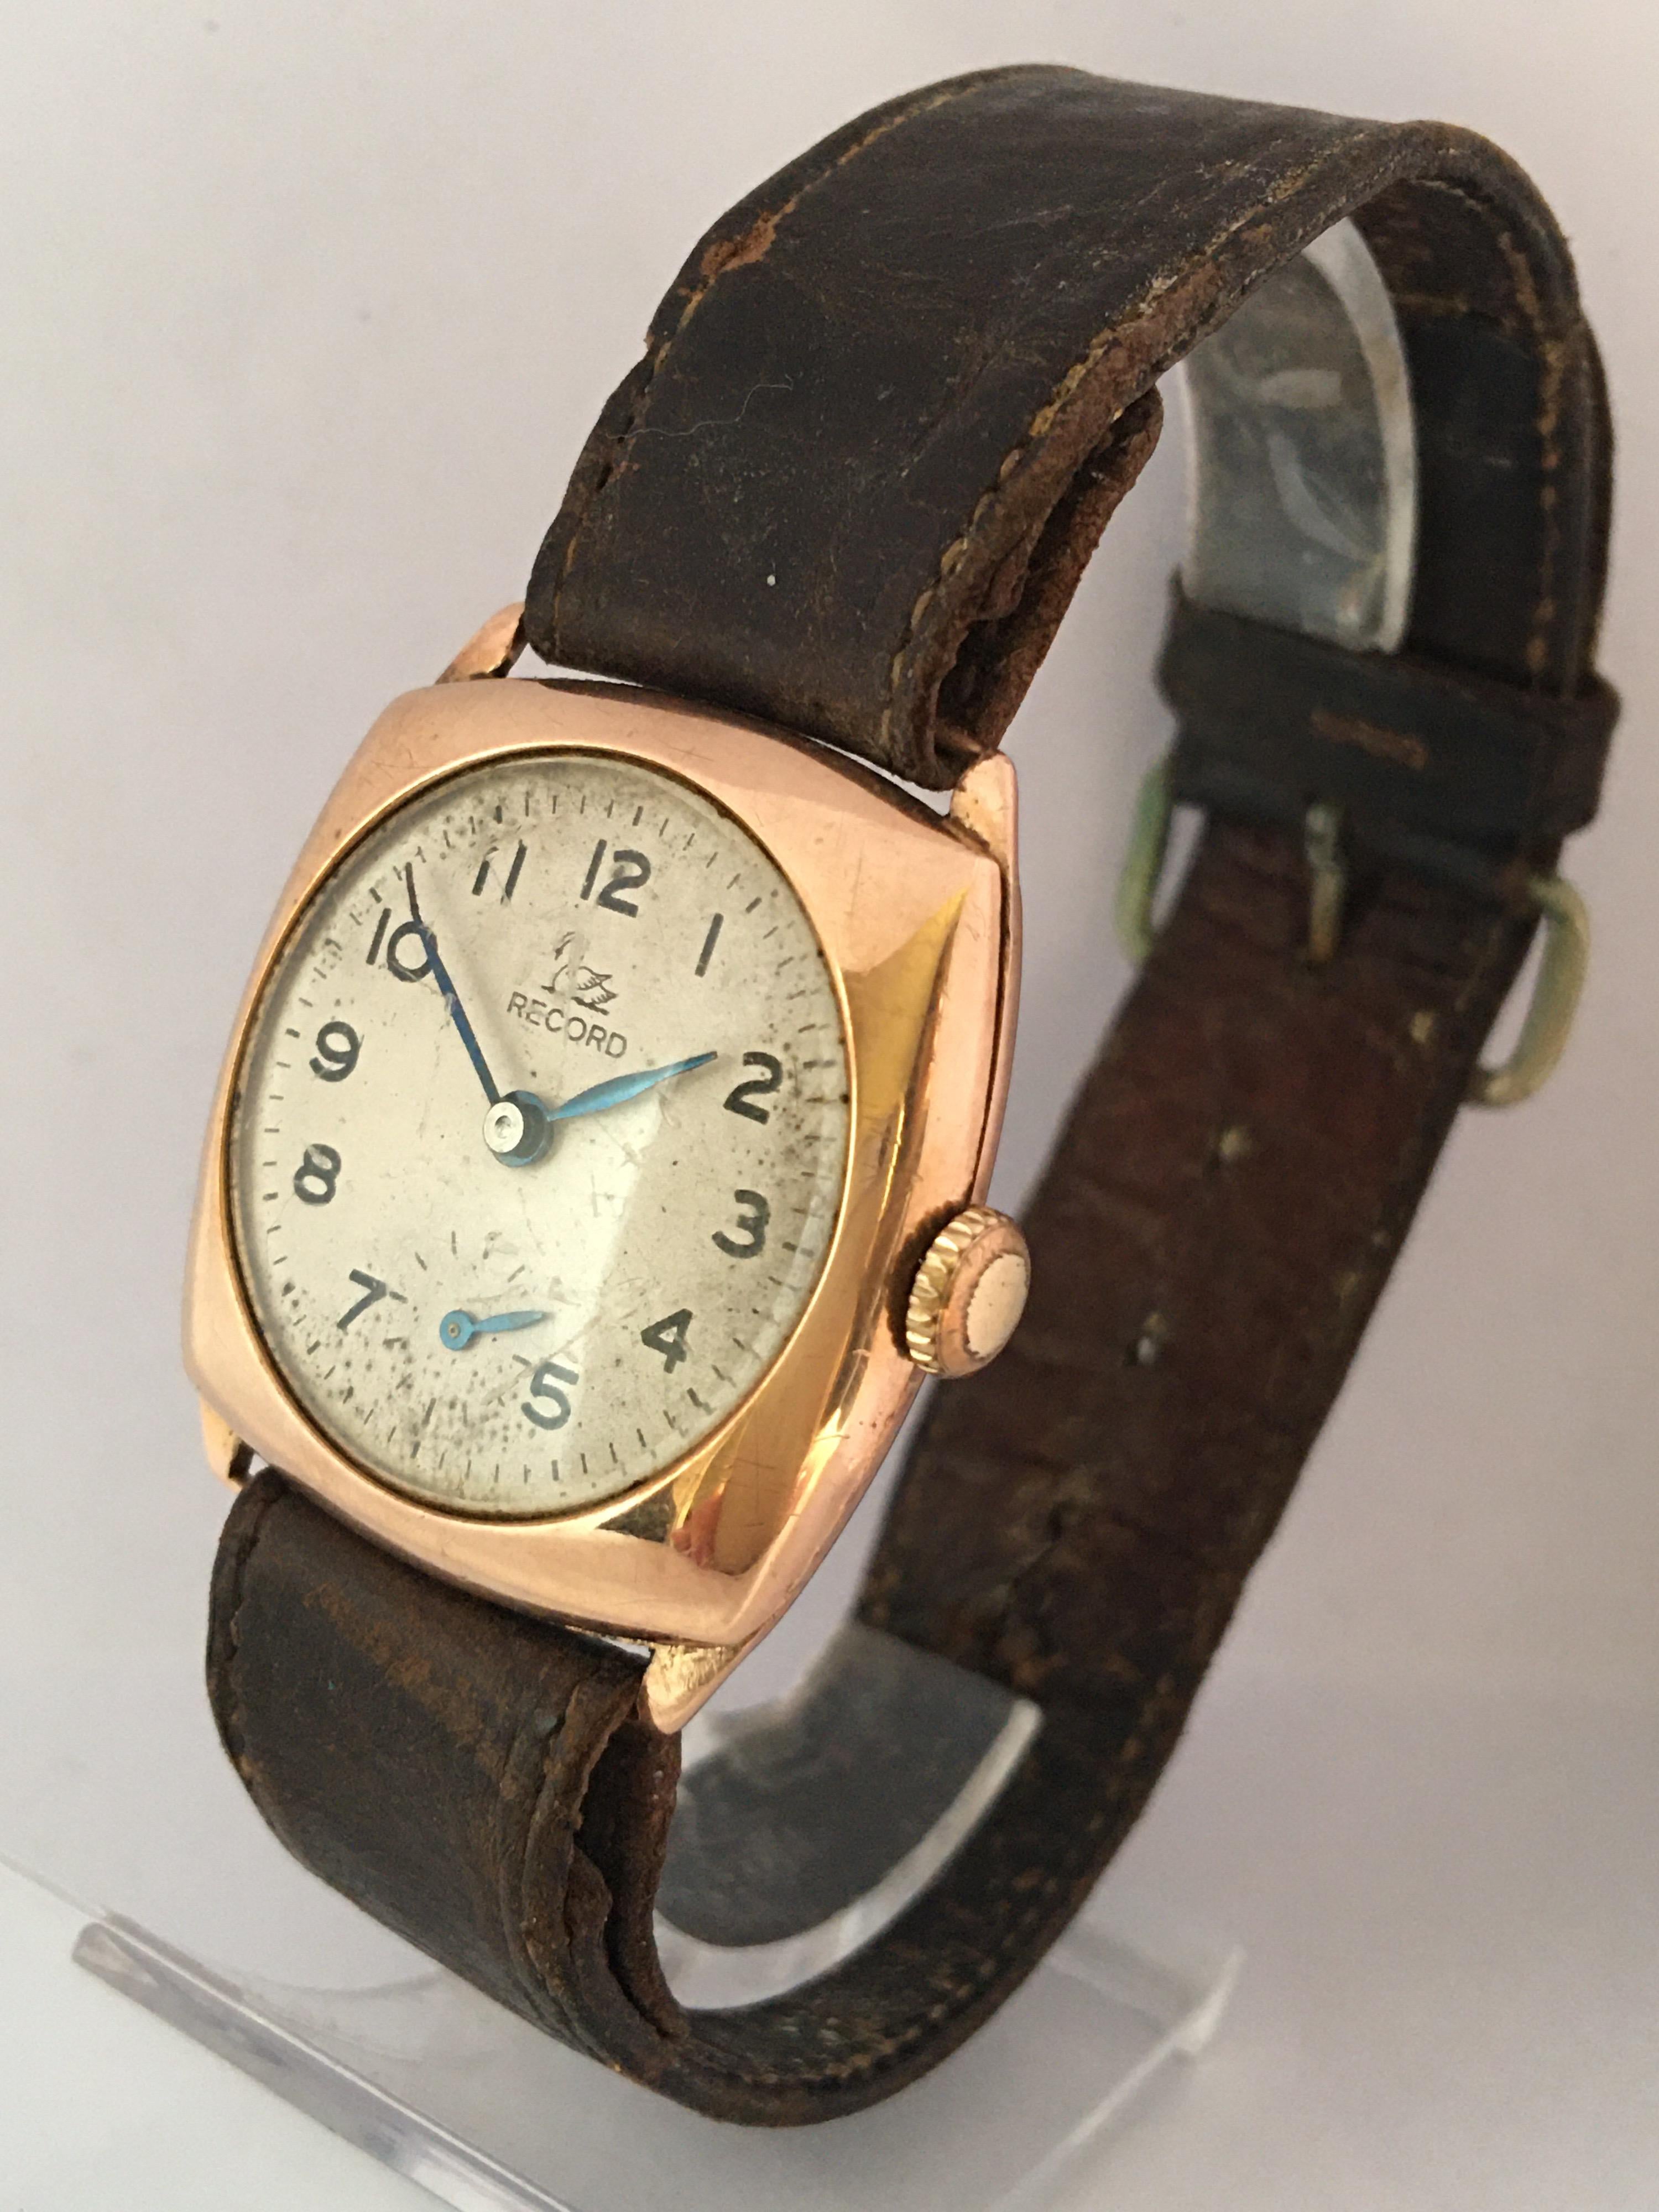 9 Karat Gold Vintage 1950s Récord Cushion Shaped Mechanical Watch For Sale 1